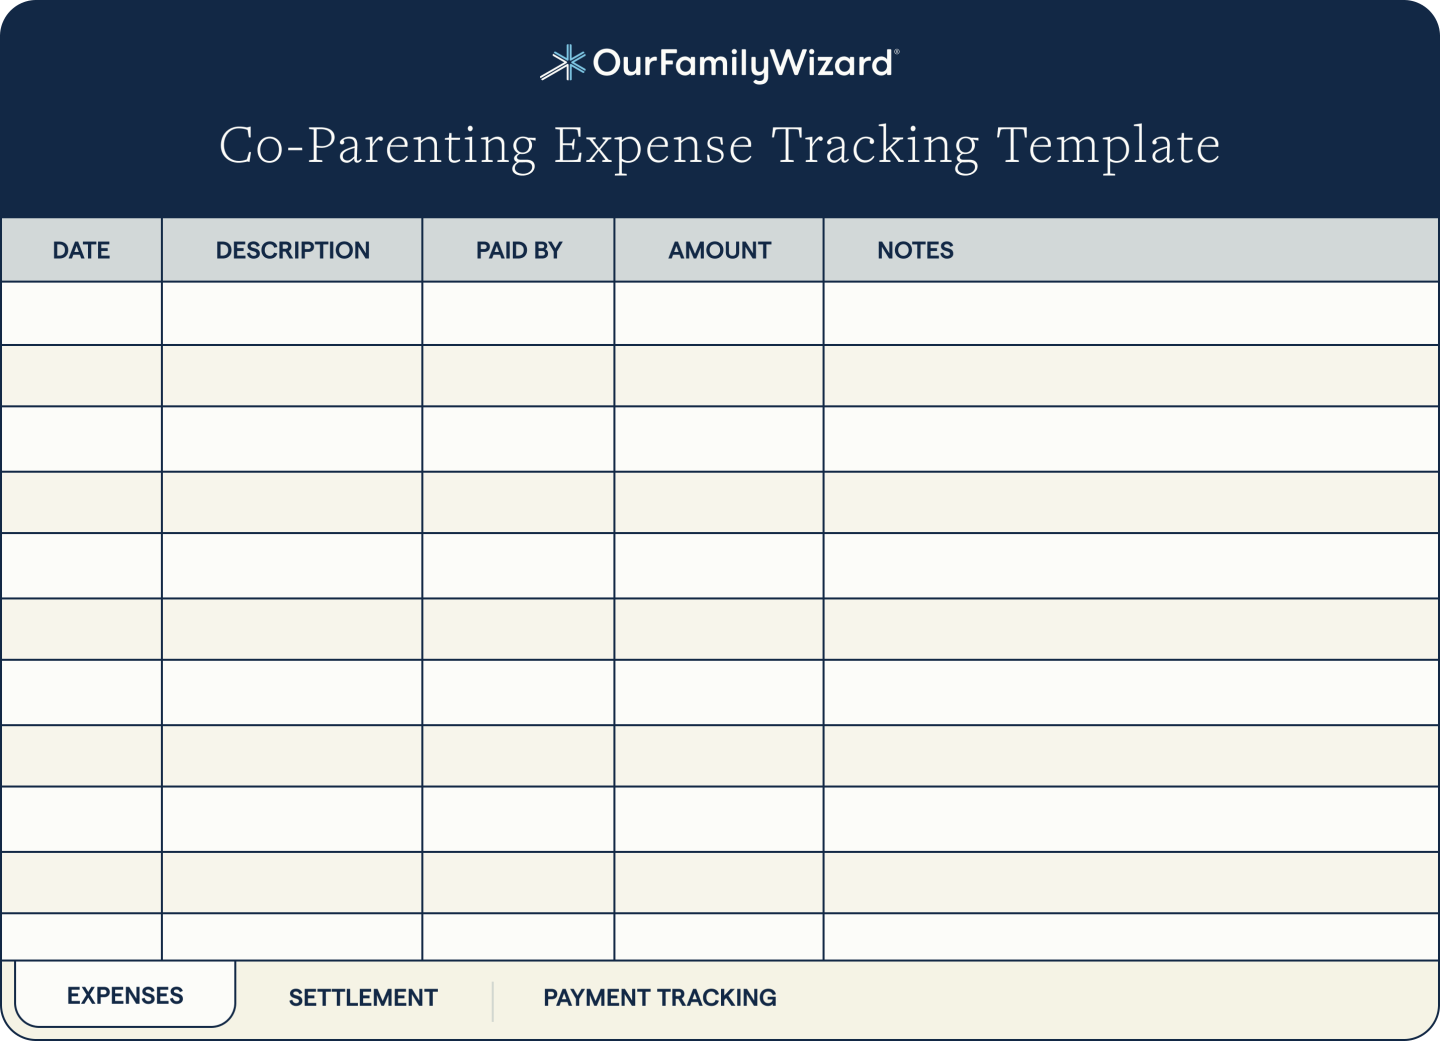 Free Coparenting Shared Expense Templates OurFamilyWizard